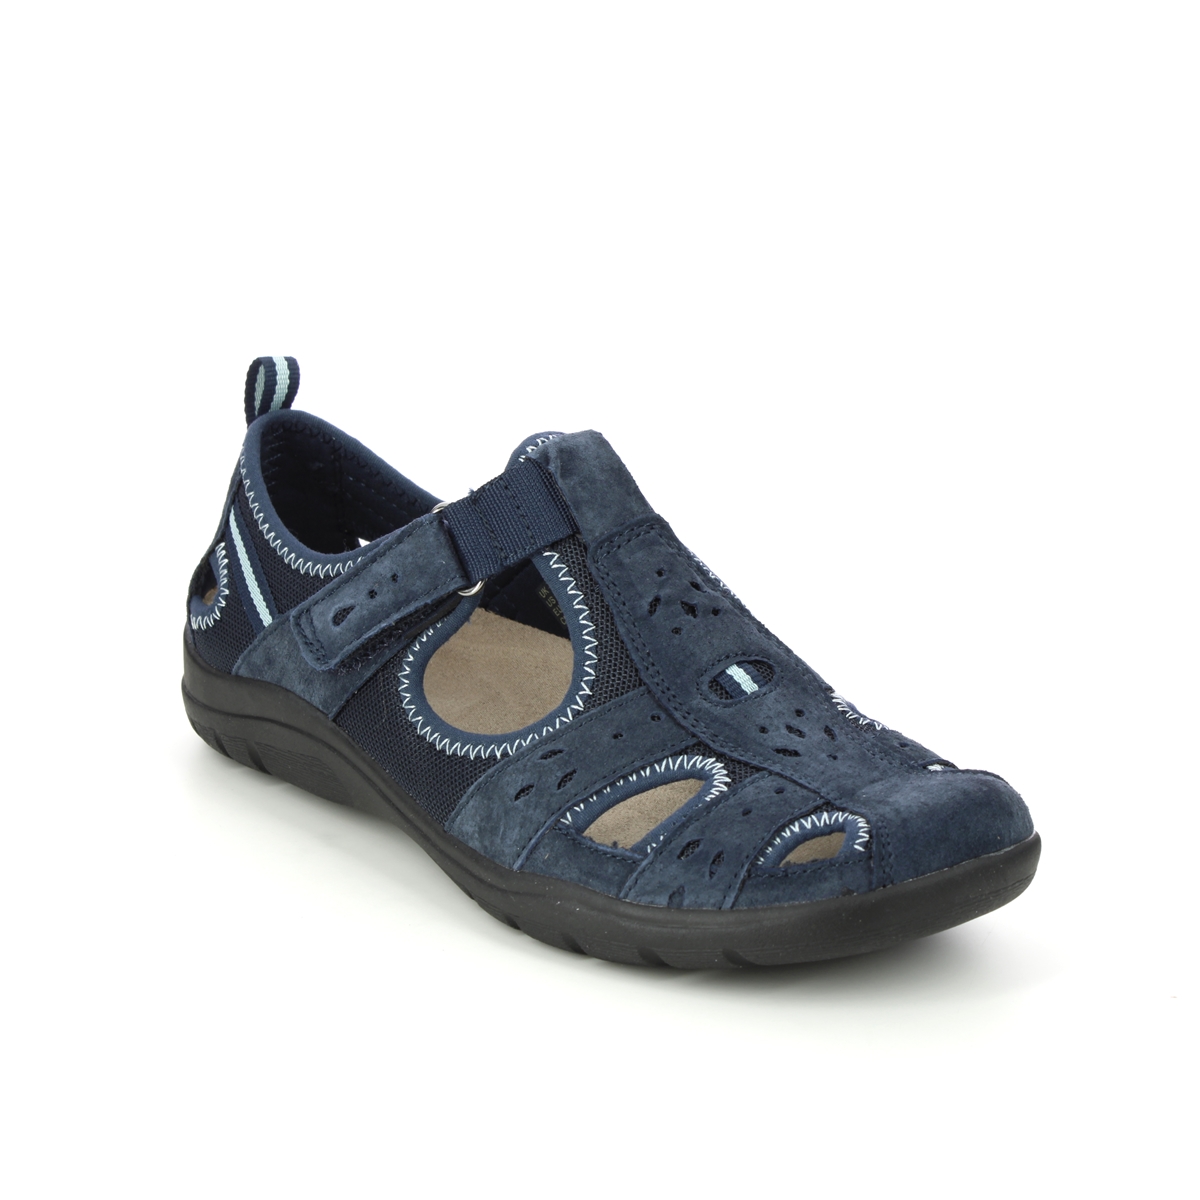 Earth Spirit Cleveland 01 Navy Suede Womens Closed Toe Sandals 40501-73 in a Plain Leather in Size 7